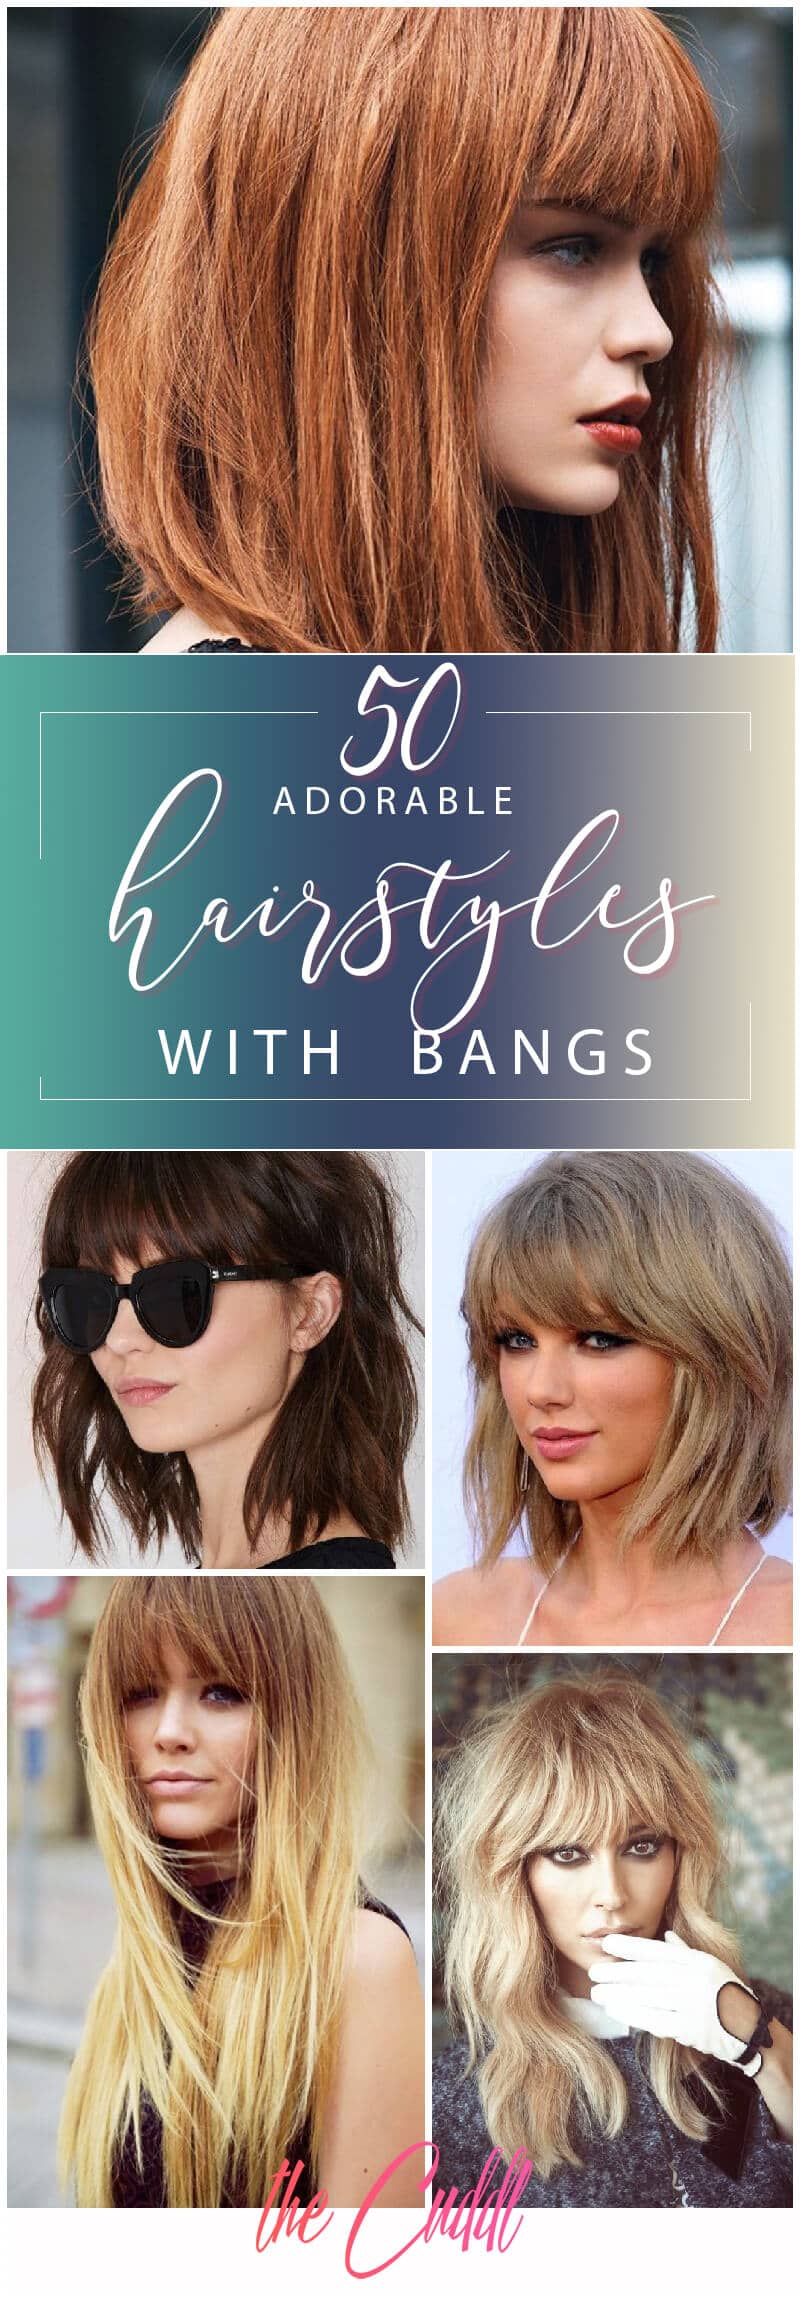 50 Fun and Exciting Ways to Update Your Hairstyle with Bangs